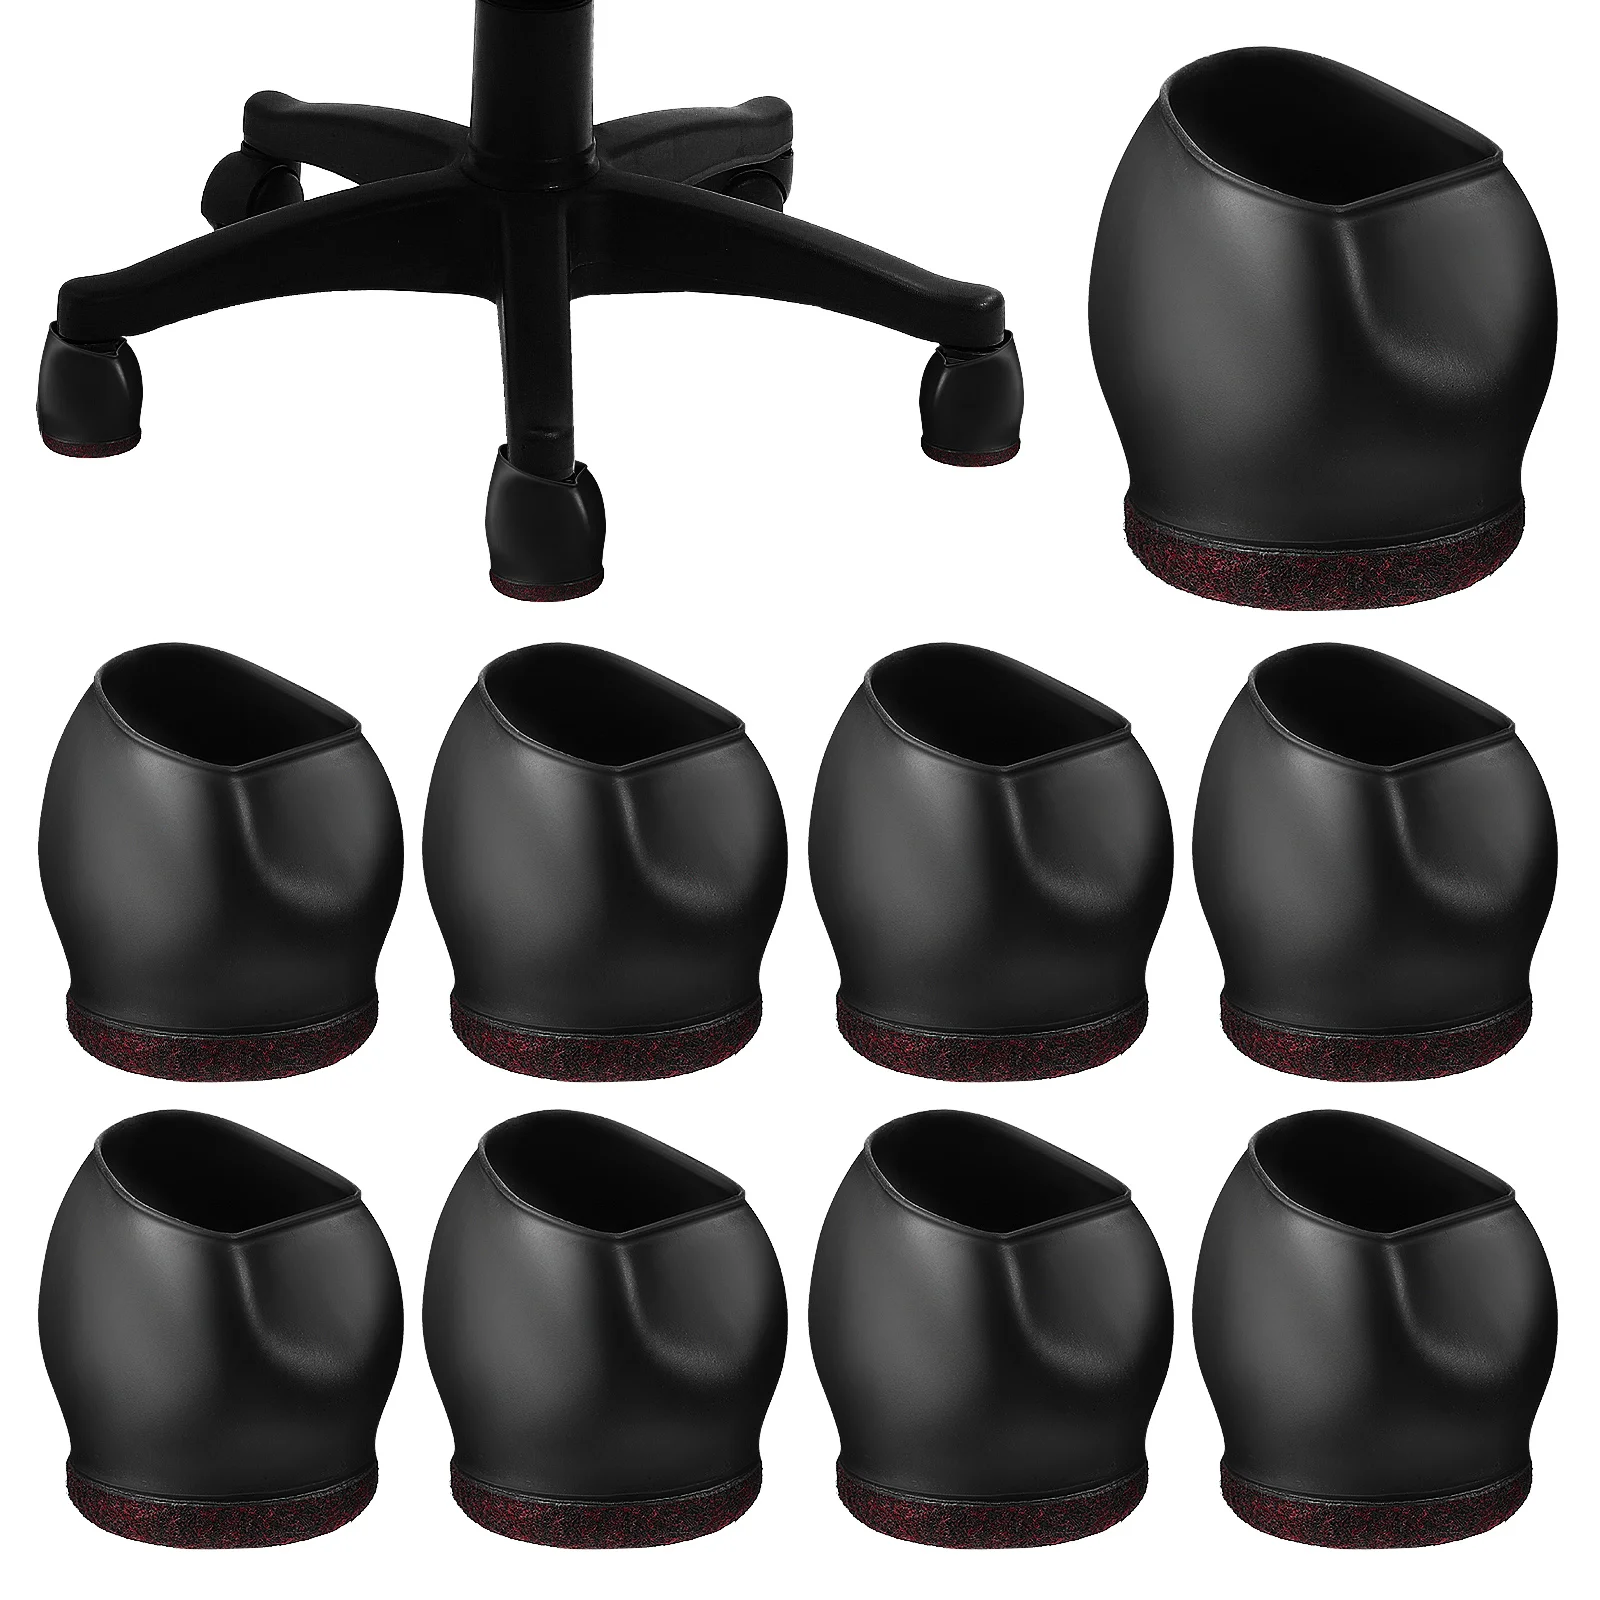 

10 Pcs Caster Wheels Chair Cups Protectors Covers Pulley Rolling Stopper Office